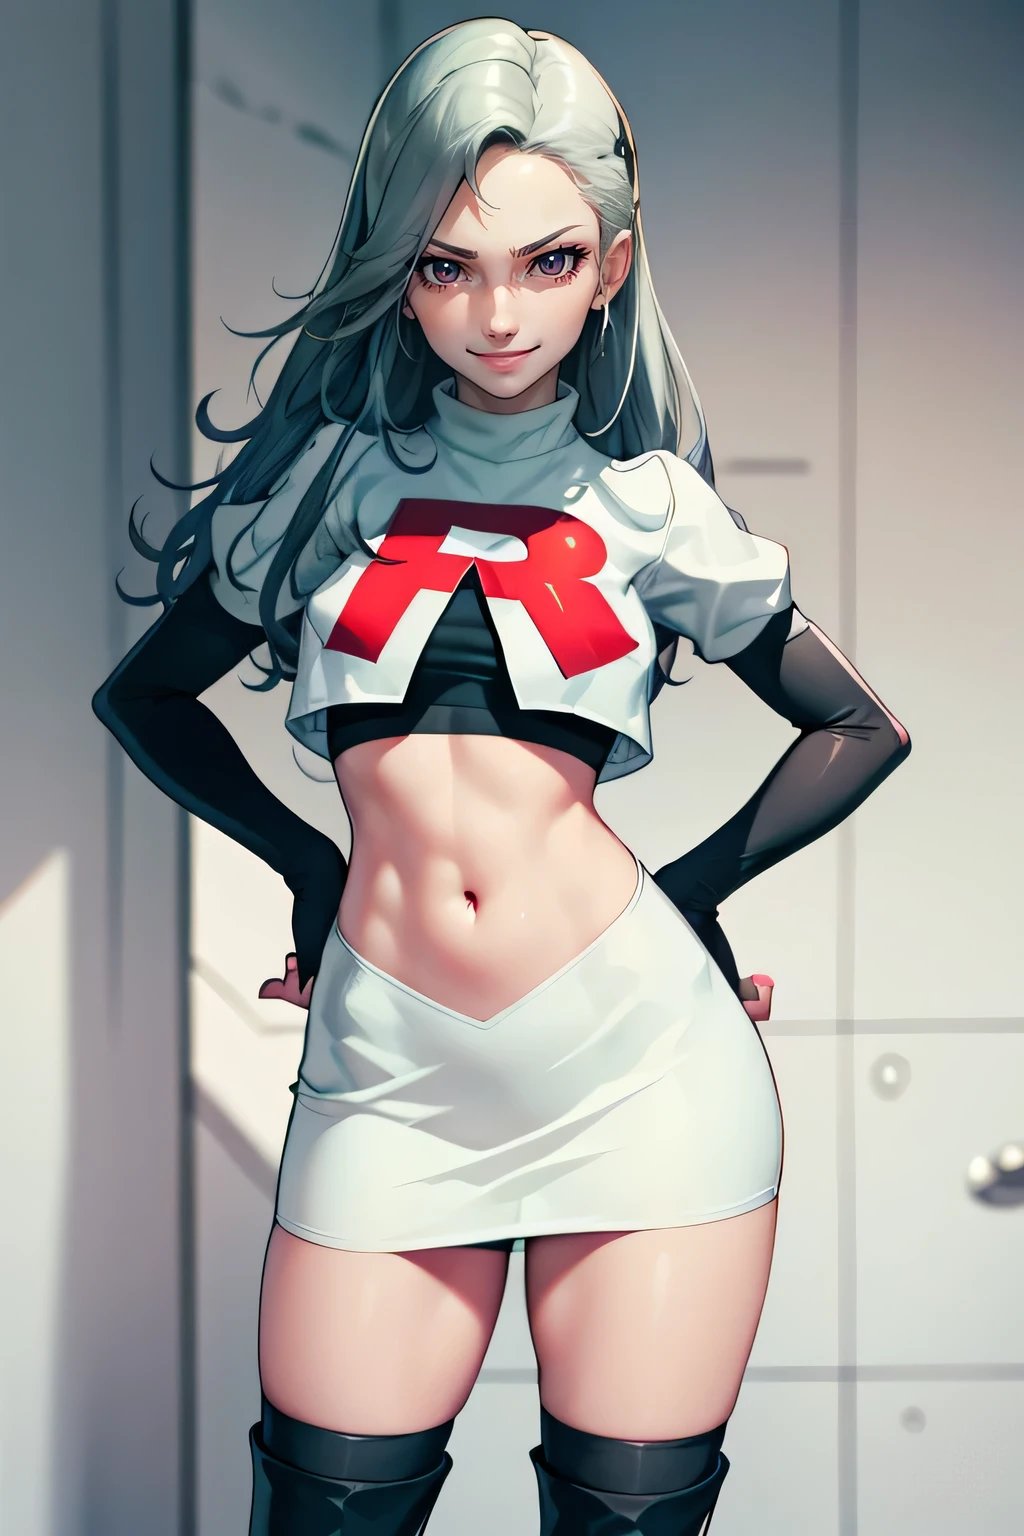 saep5 ,glossy lips ,team rocket uniform, red letter R, white skirt,white crop top,black thigh-high boots, black elbow gloves, evil smile, hands on hips